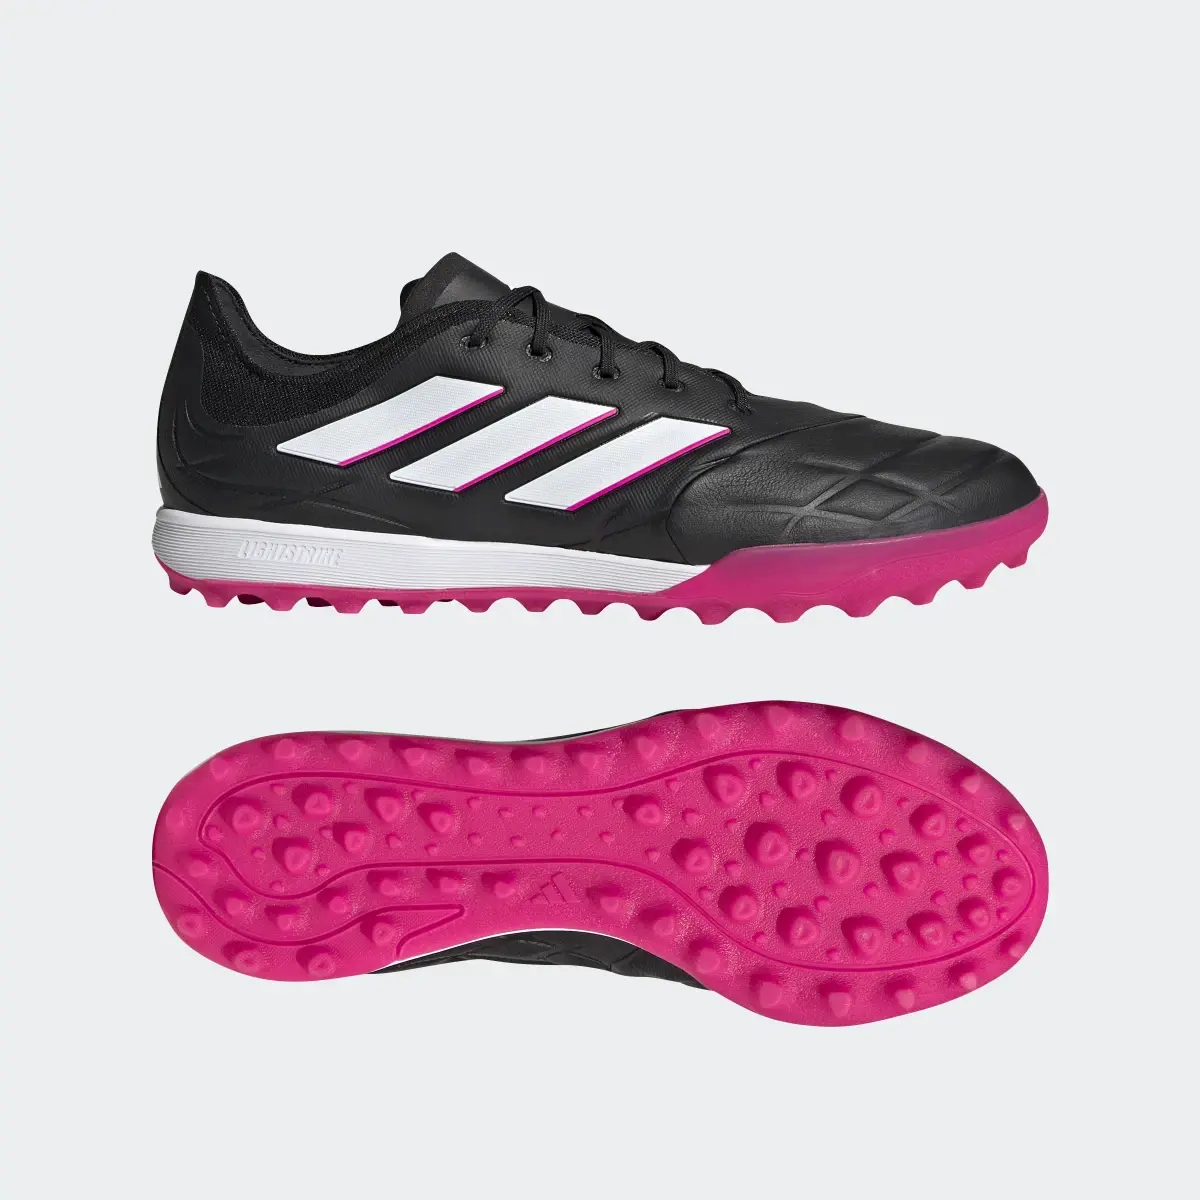 Adidas Copa Pure.1 Turf Boots. 1